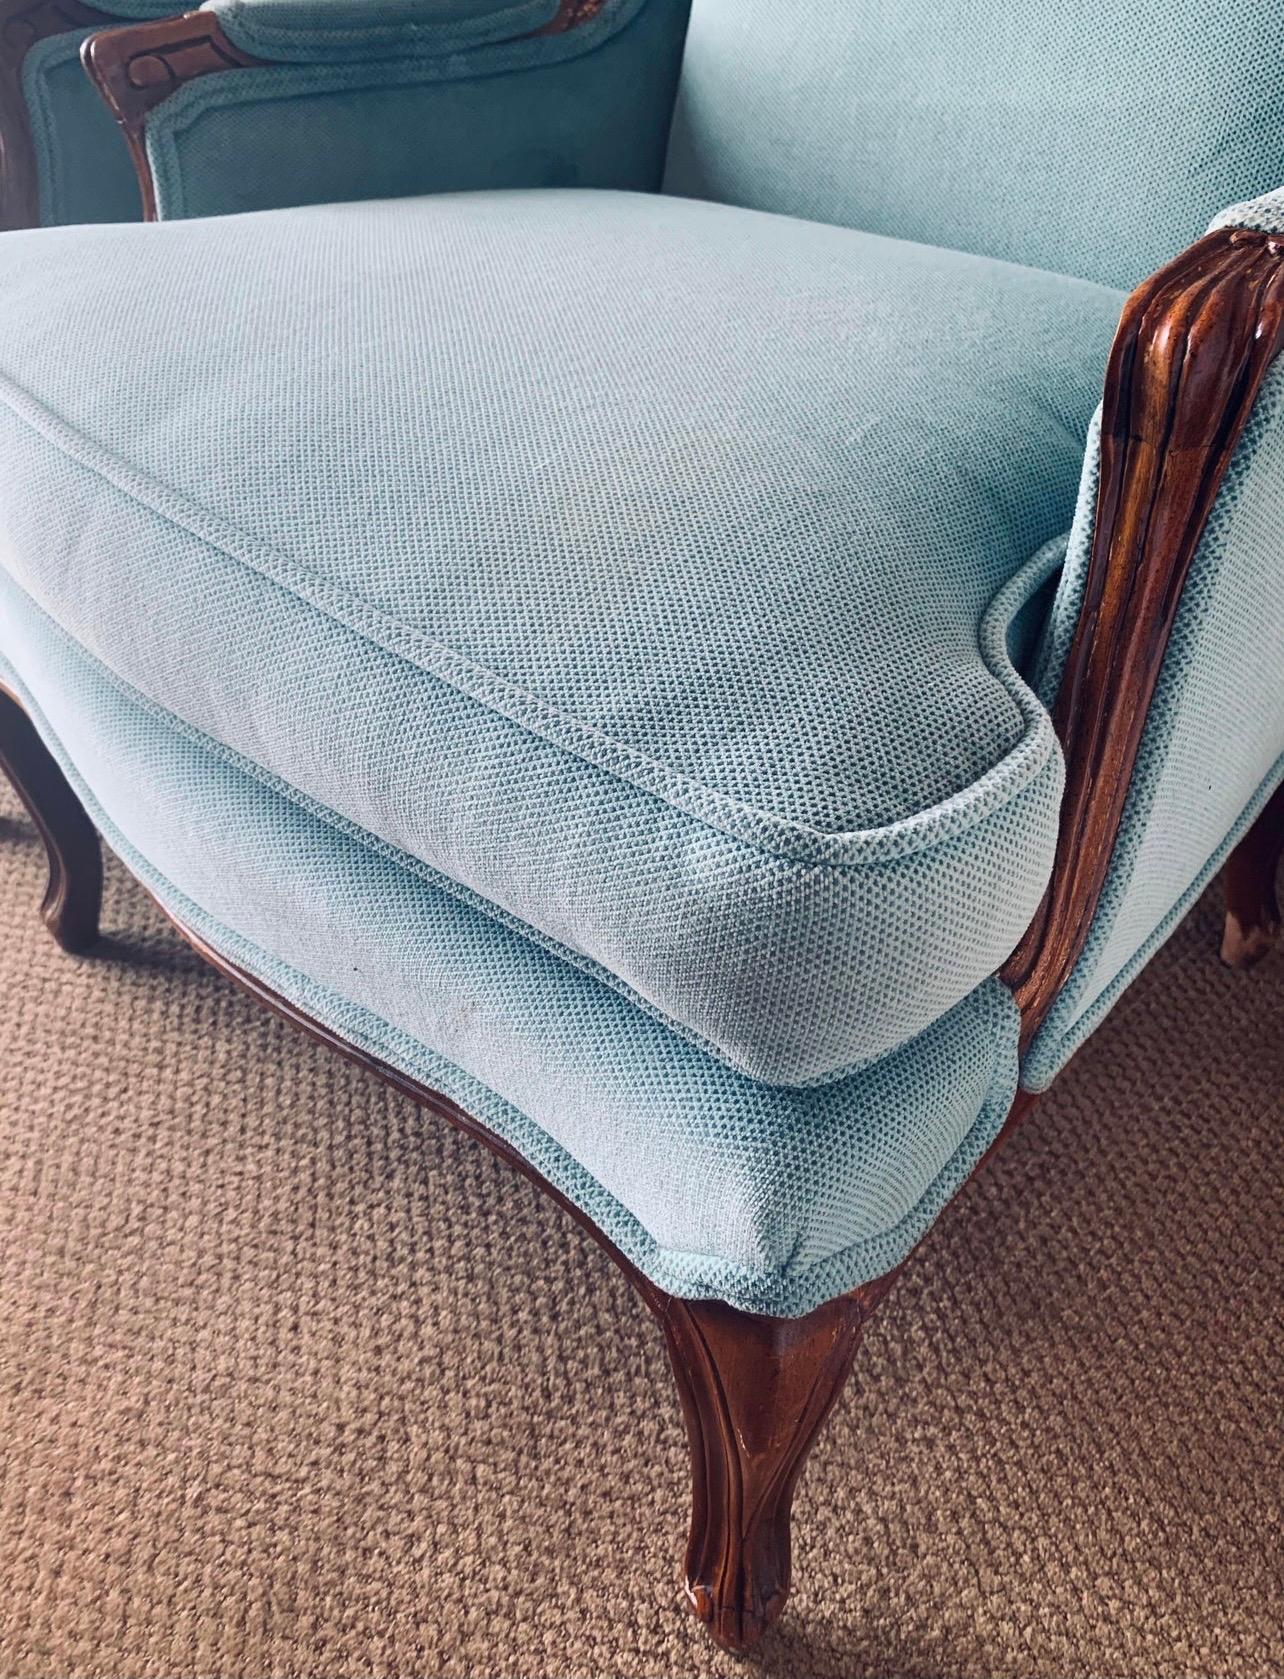 Elegant pair of vintage French wingbacks with the most gorgeous light blue cotton chenille upholstery. Small pulls on back corners. Now, more than ever, home is where the heart is.